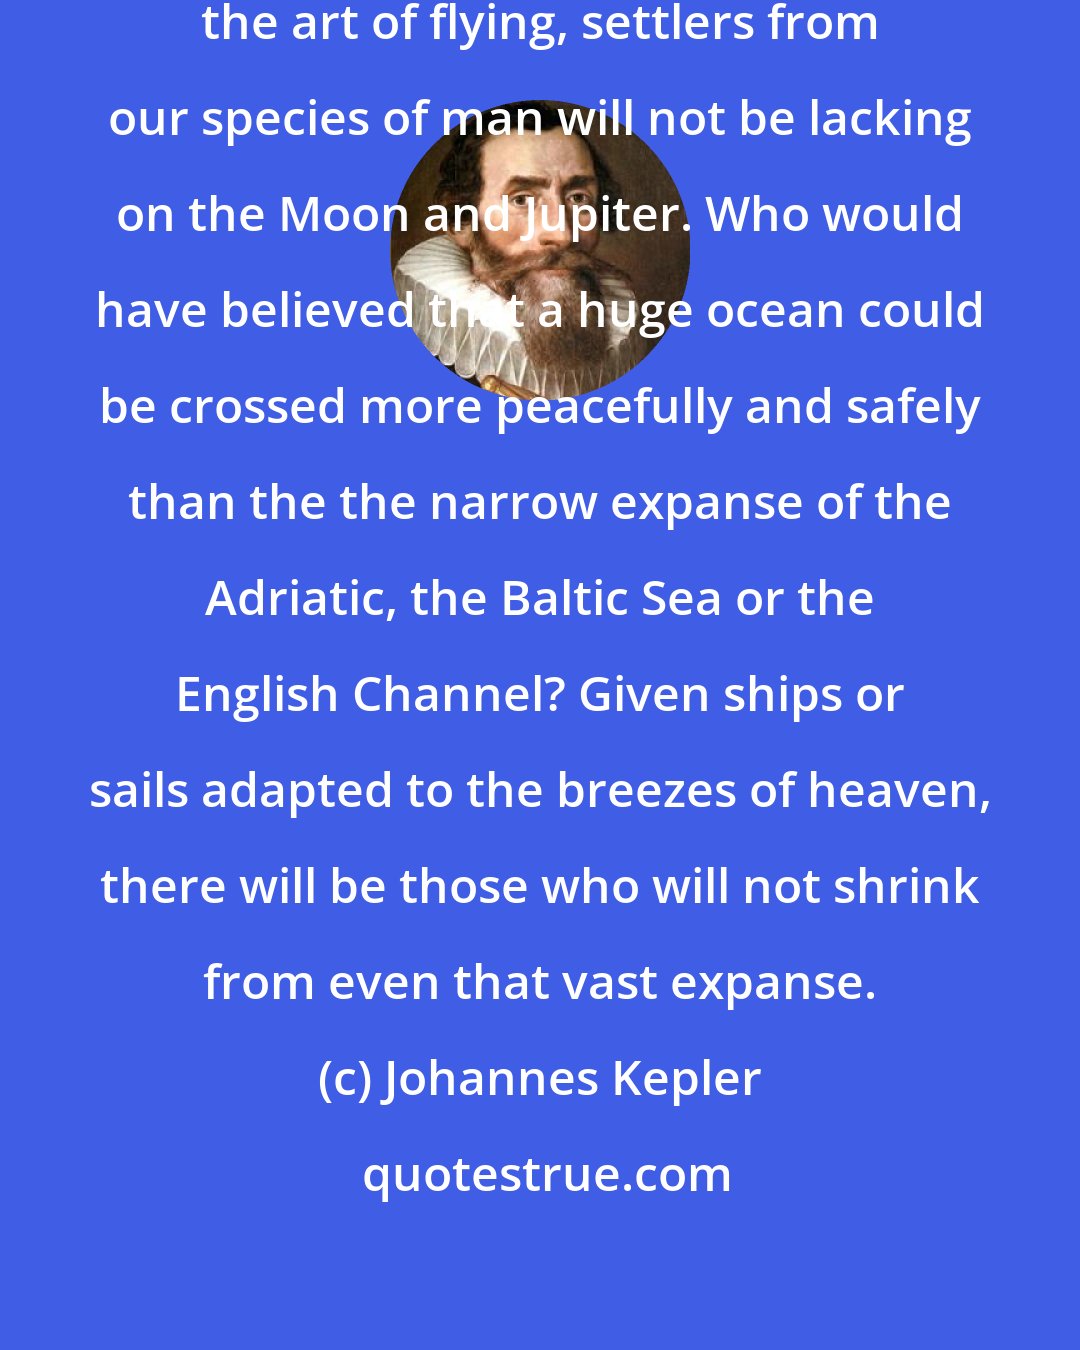 Johannes Kepler: As soon as somebody demonstrates the art of flying, settlers from our species of man will not be lacking on the Moon and Jupiter. Who would have believed that a huge ocean could be crossed more peacefully and safely than the the narrow expanse of the Adriatic, the Baltic Sea or the English Channel? Given ships or sails adapted to the breezes of heaven, there will be those who will not shrink from even that vast expanse.